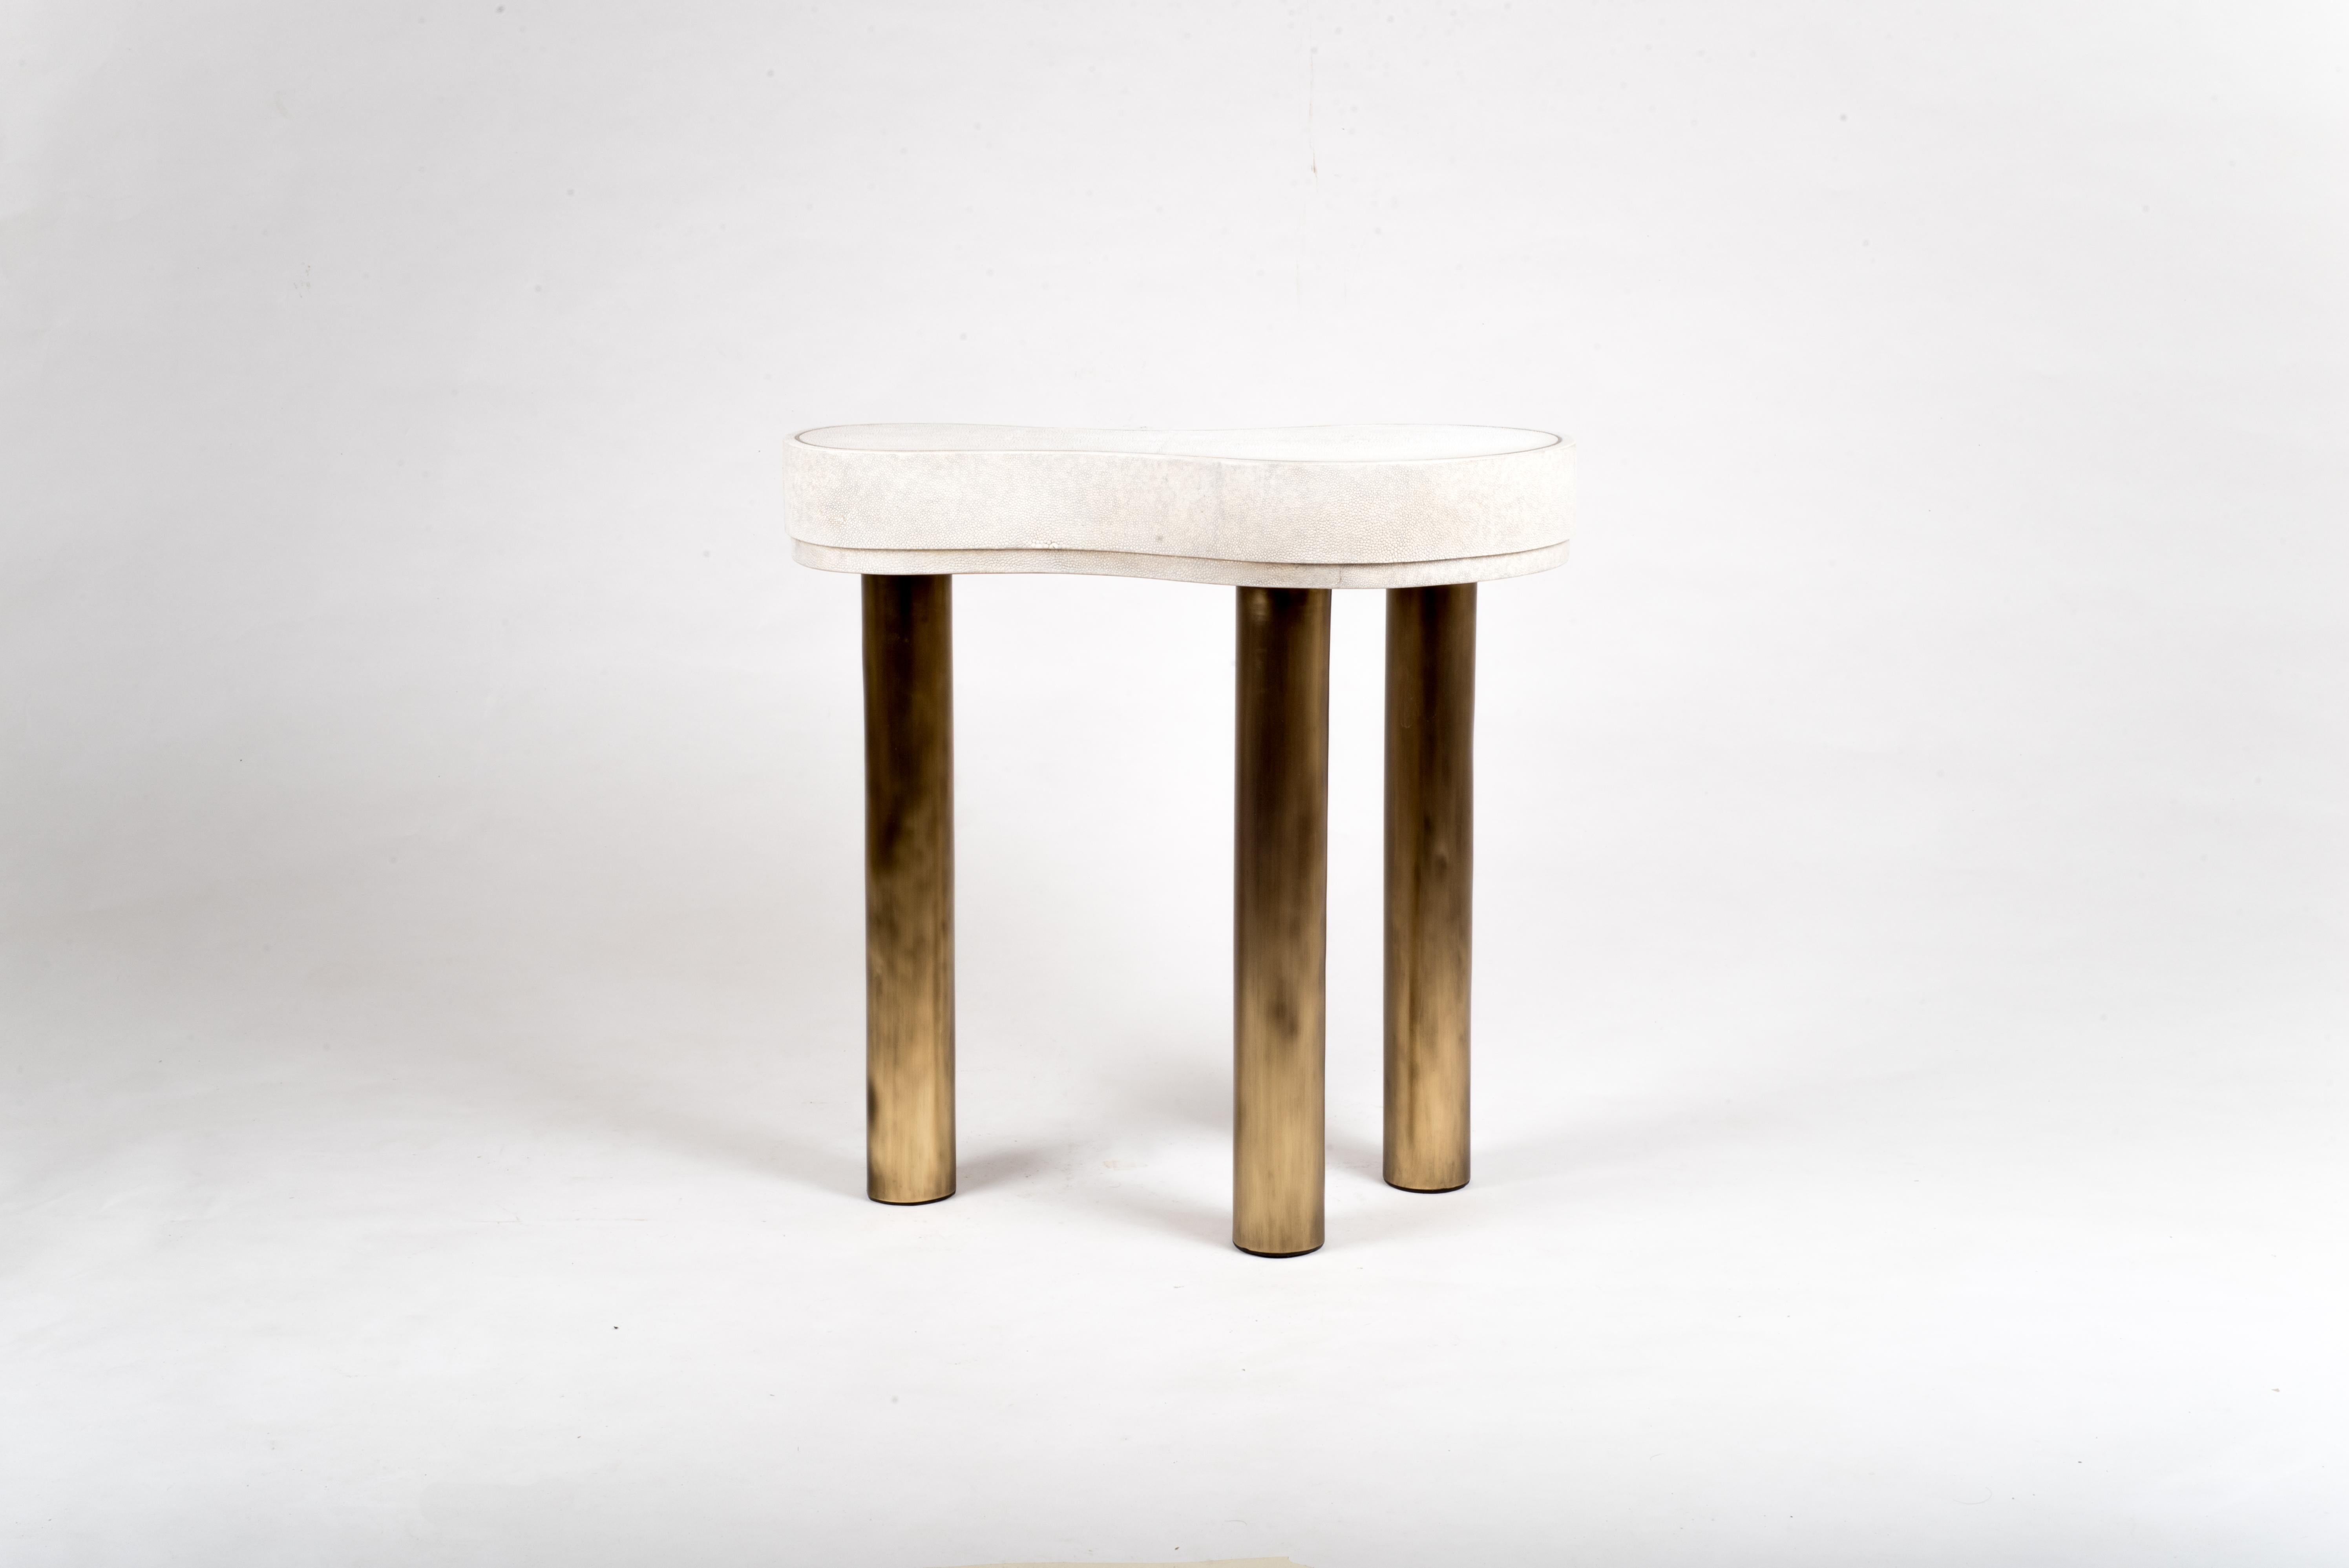 The constellation side table is whimsical and elegant with it’s amorphous shape. The shagreen is hand-dyed by artisans and the designer calls the final finish “Antique Natural” shagreen. The piece has beautiful discreet details of a metal